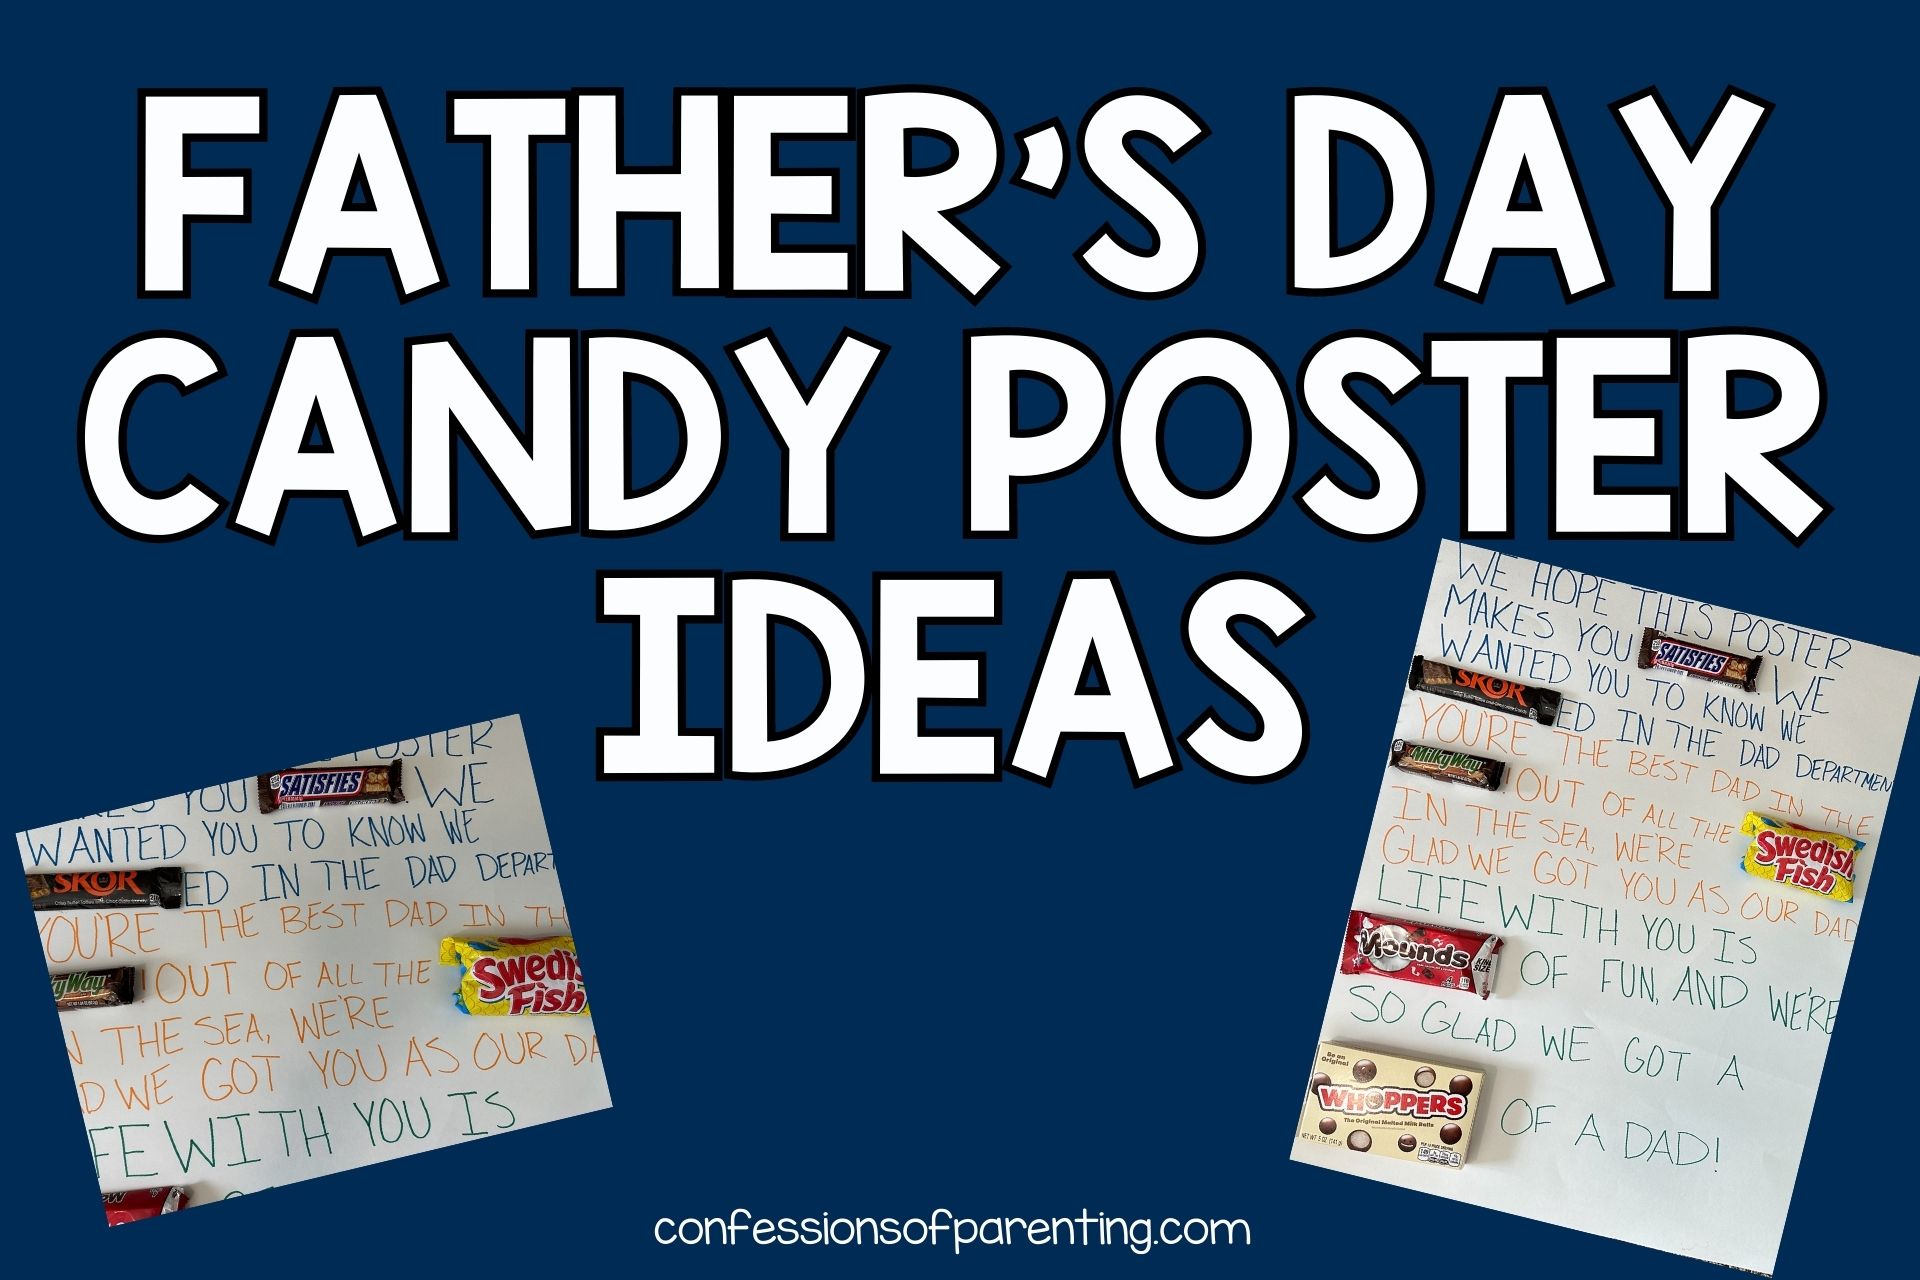 fathers day candy poster ideas.jpg